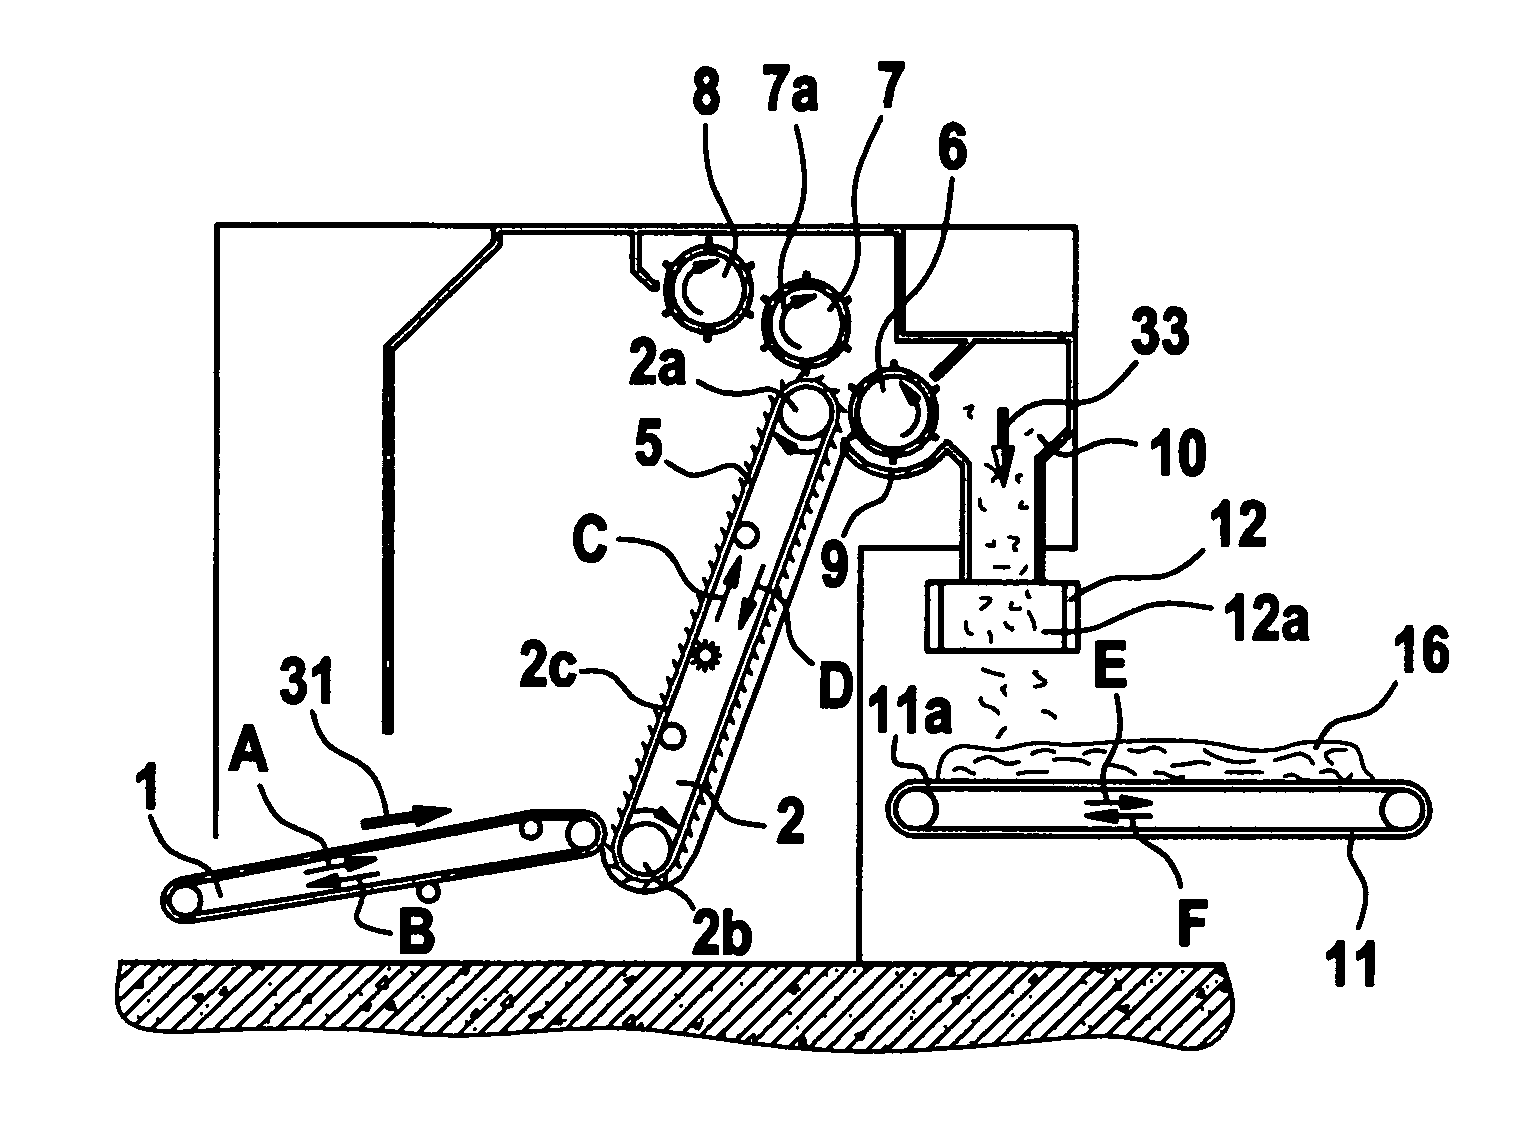 Apparatus for measuring the mass of fibre material passing through a spinning preparation machine or system